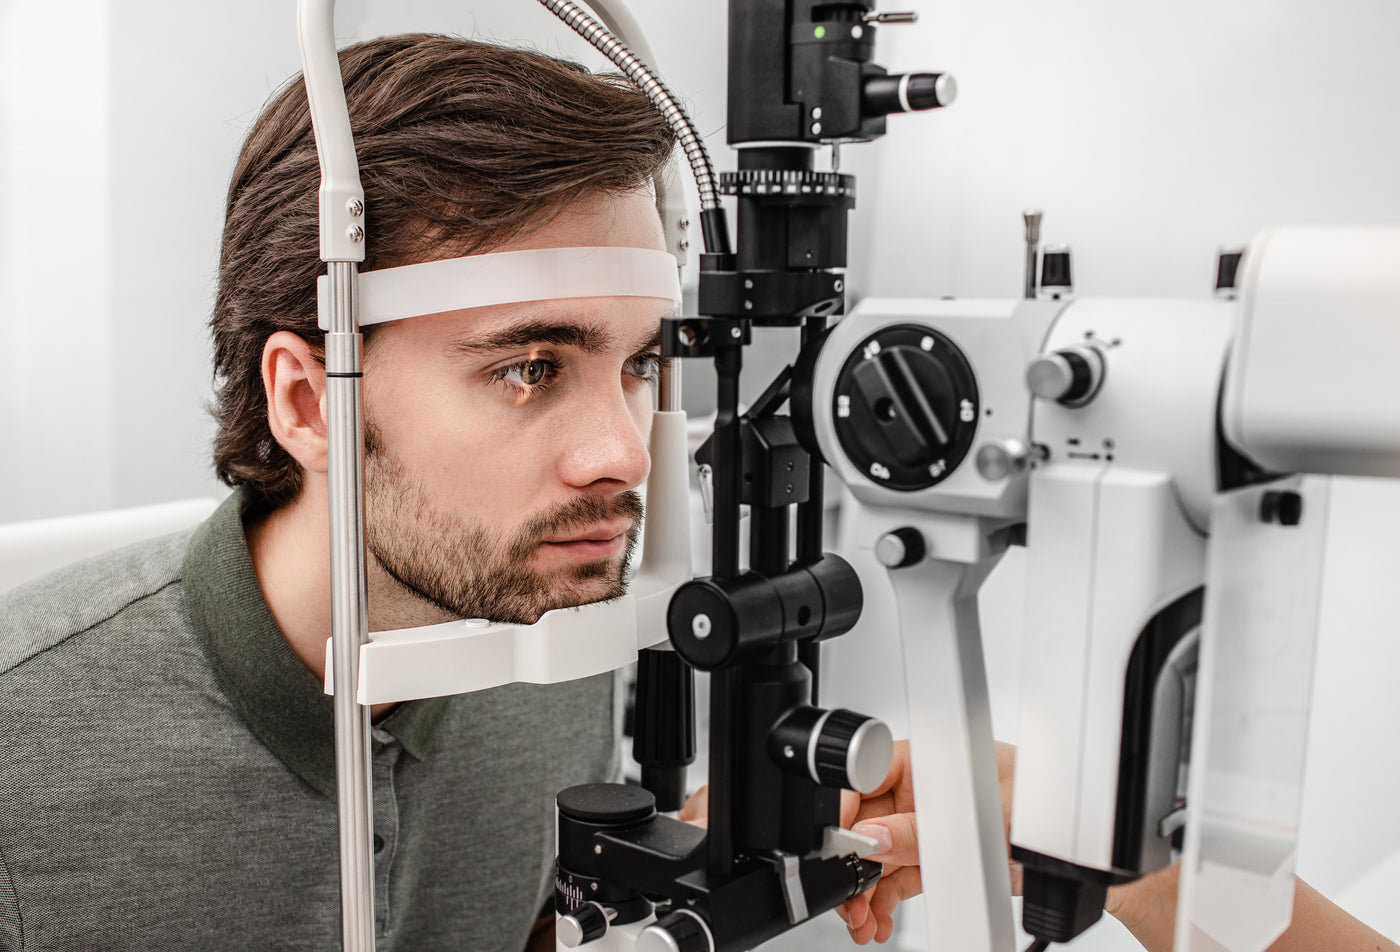 Adult man getting an eye exam at ophthalmology clinic. Checking retina of a male eye close-up